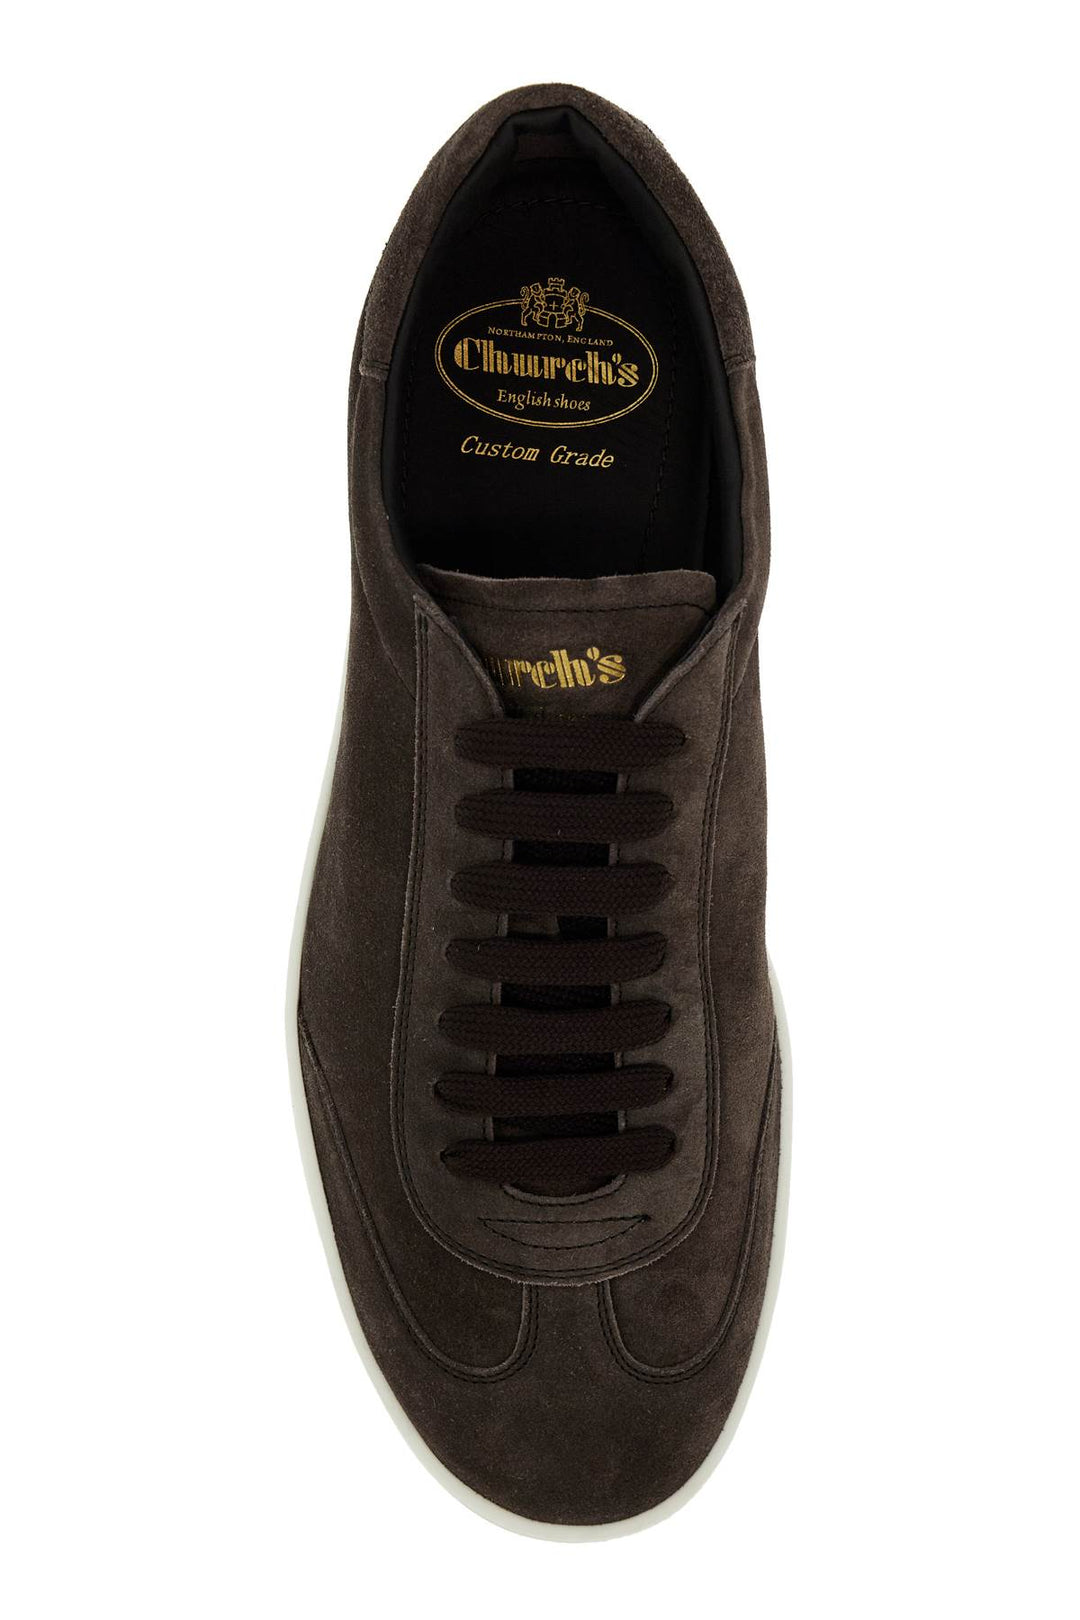 Church's Large 2 Sneakers   Brown